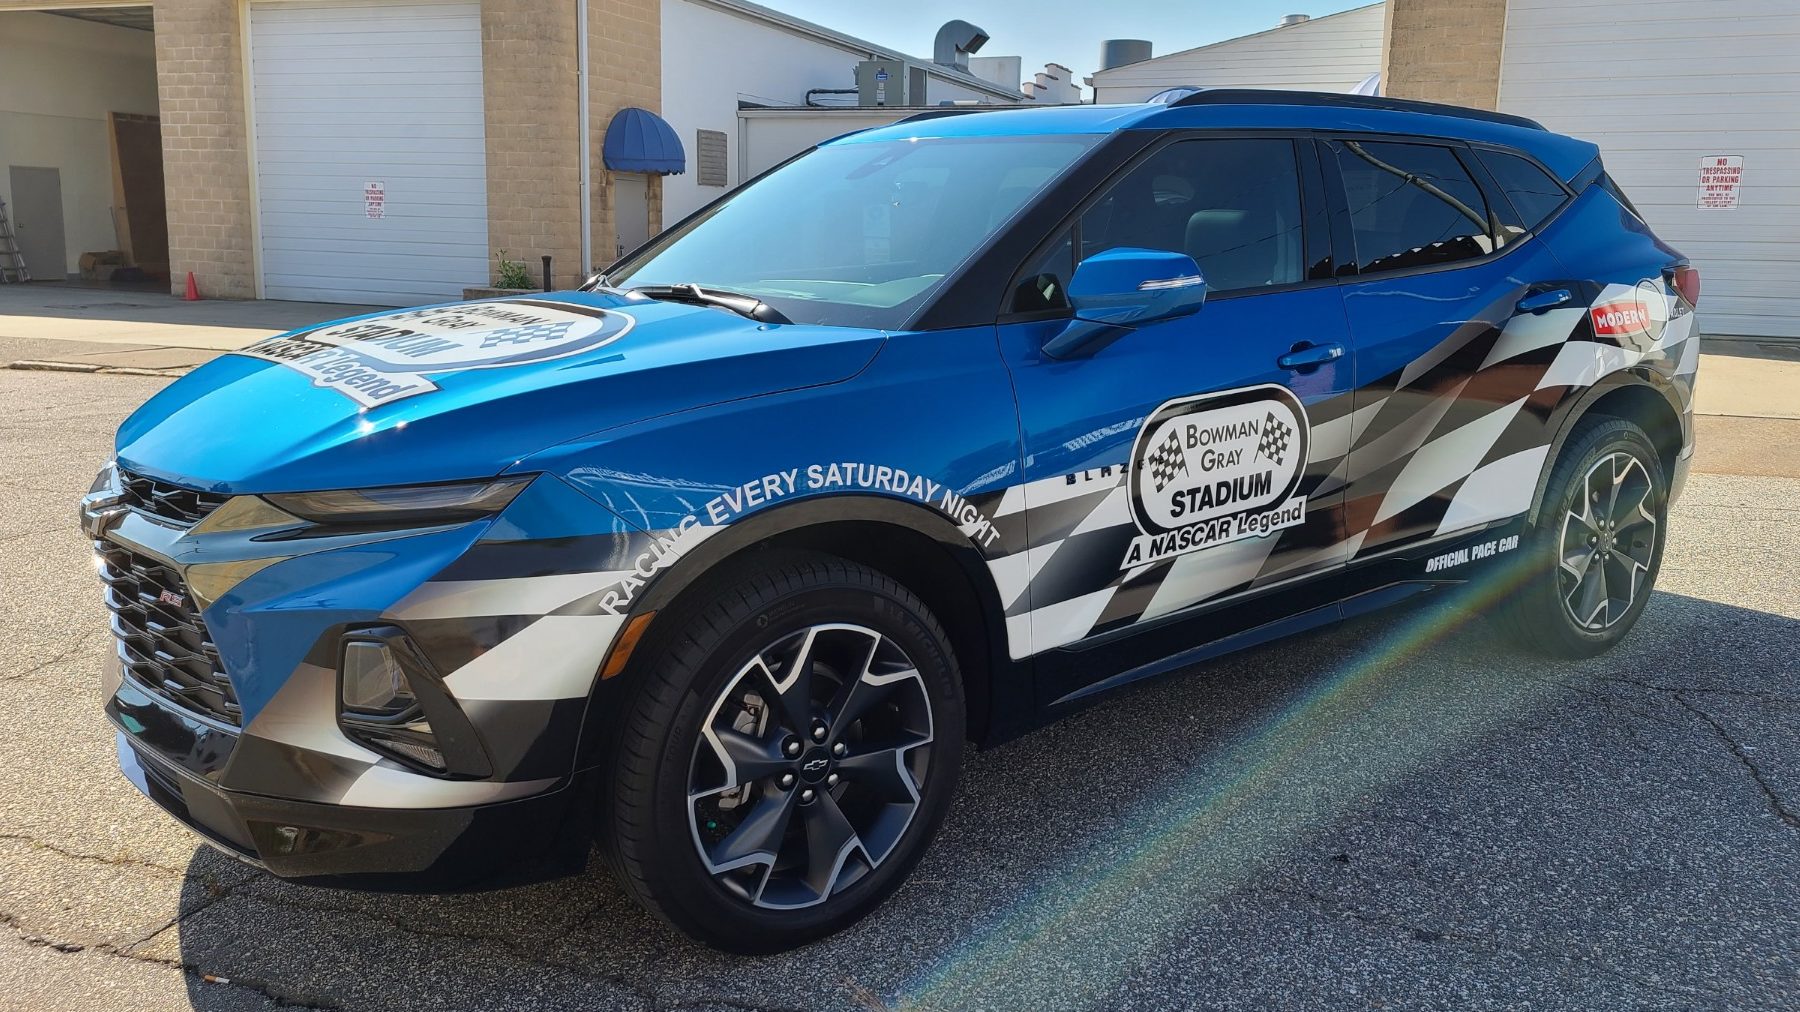 The 2021 pace car we wrapped for Bowman Gray Stadium.